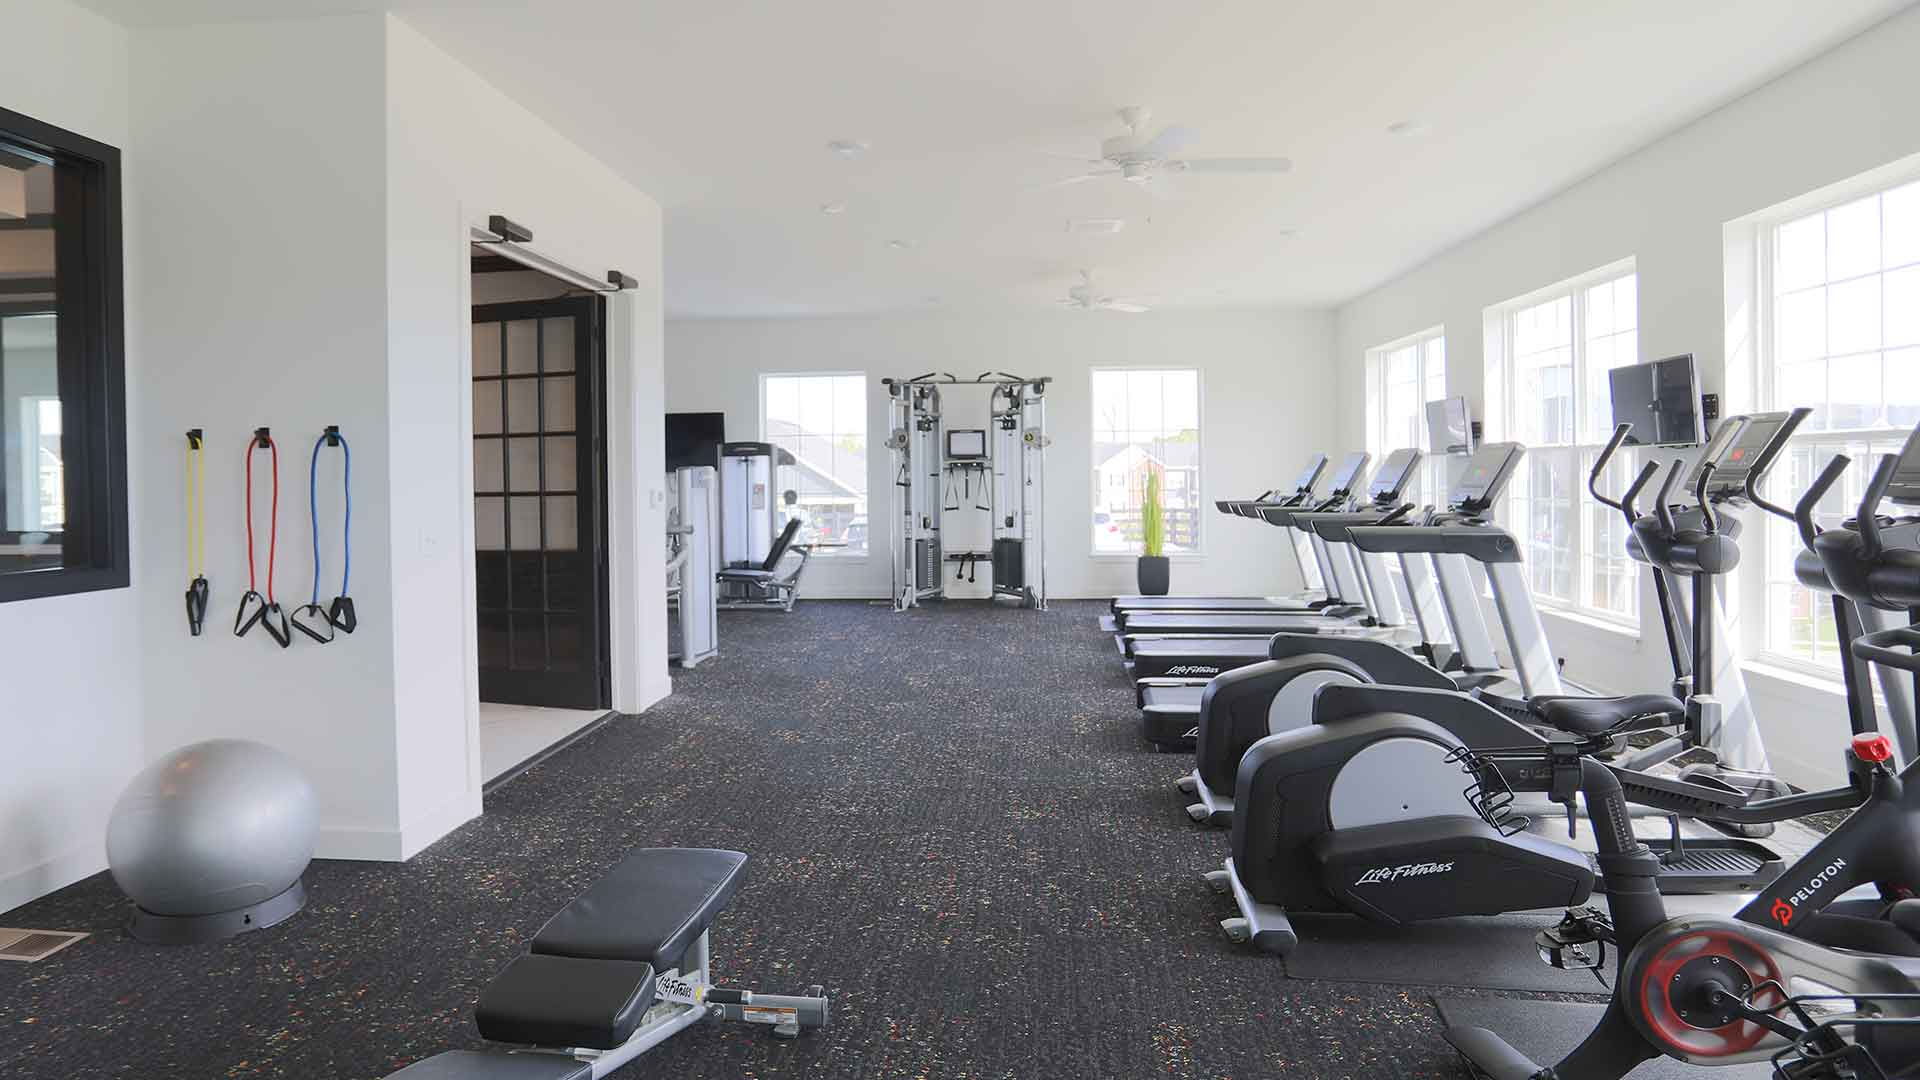 Spacious fitness center with exercise machines at Greyson on 27.